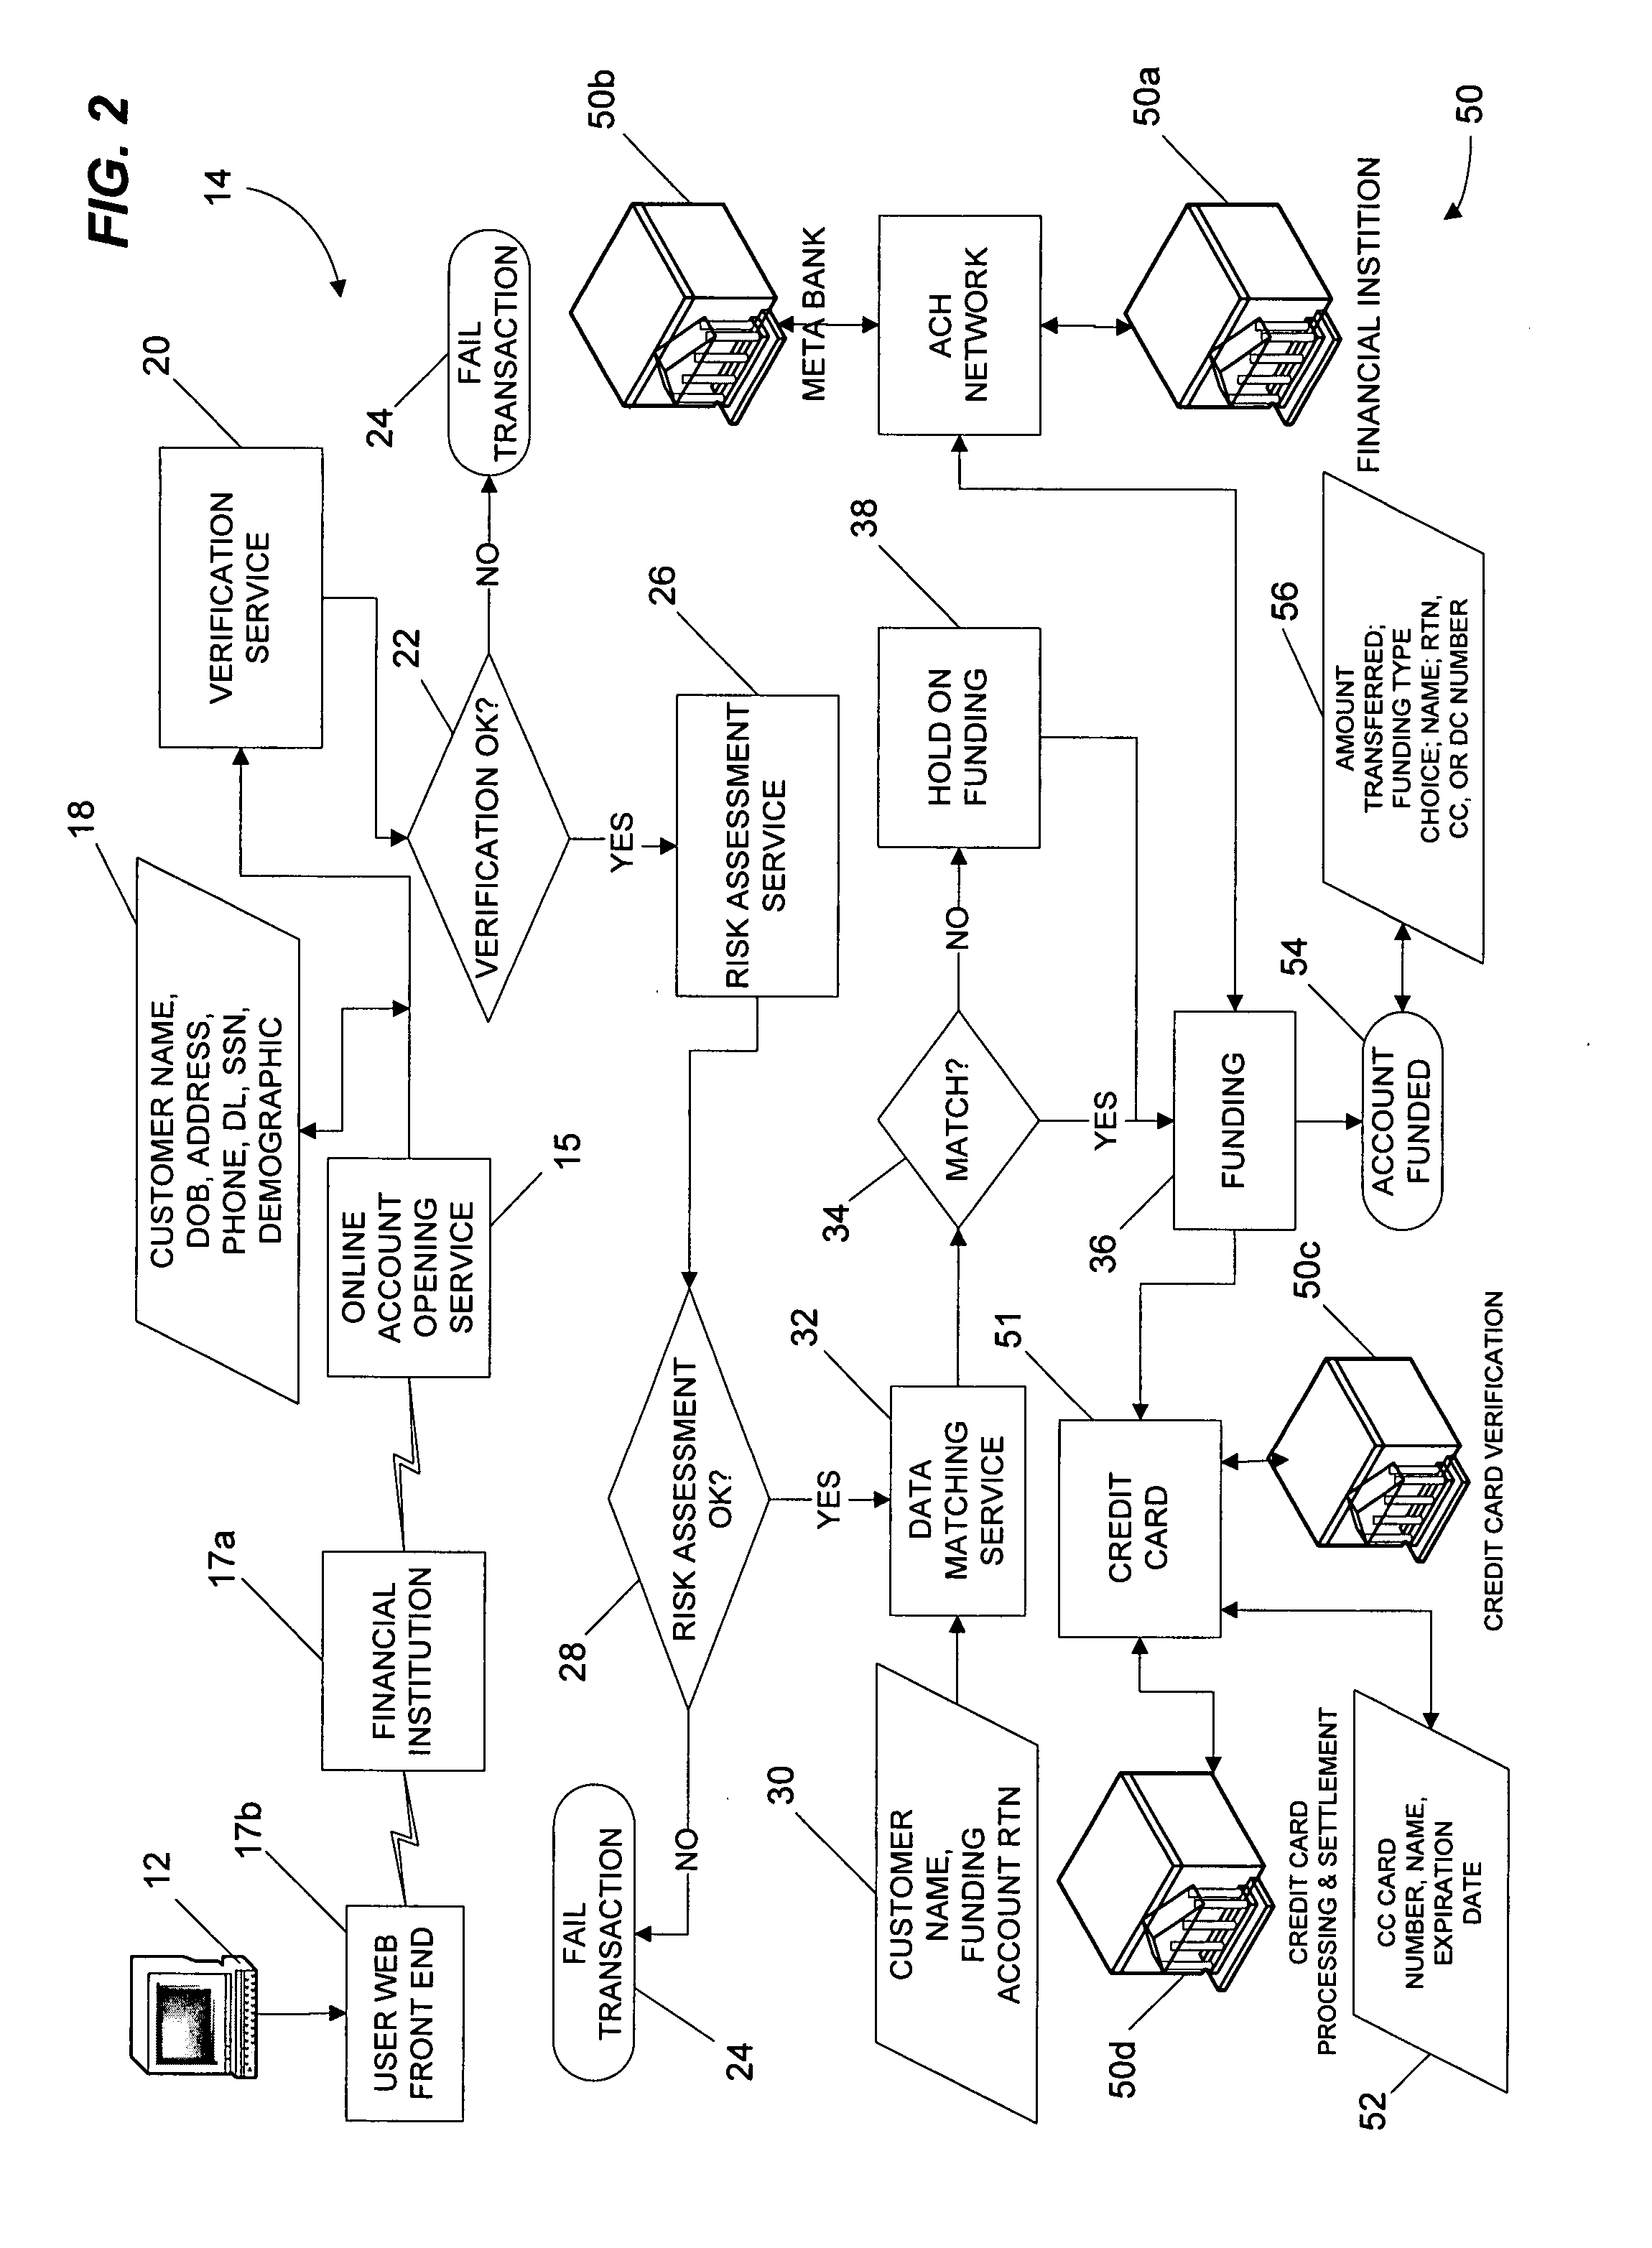 Methods and systems for opening and funding a financial account online